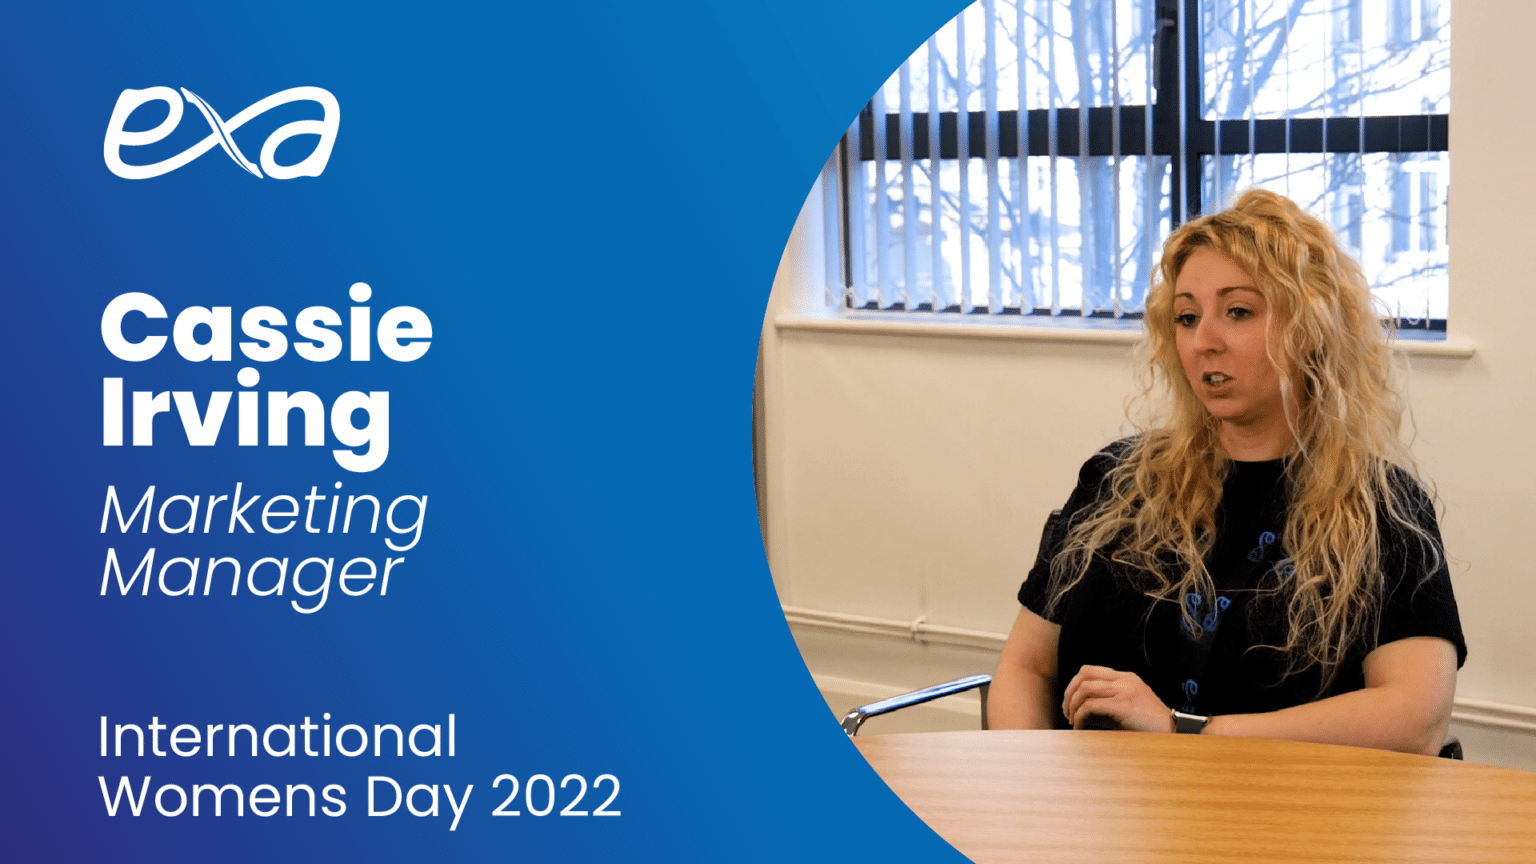 interview with marketing manager cassie for international women's day